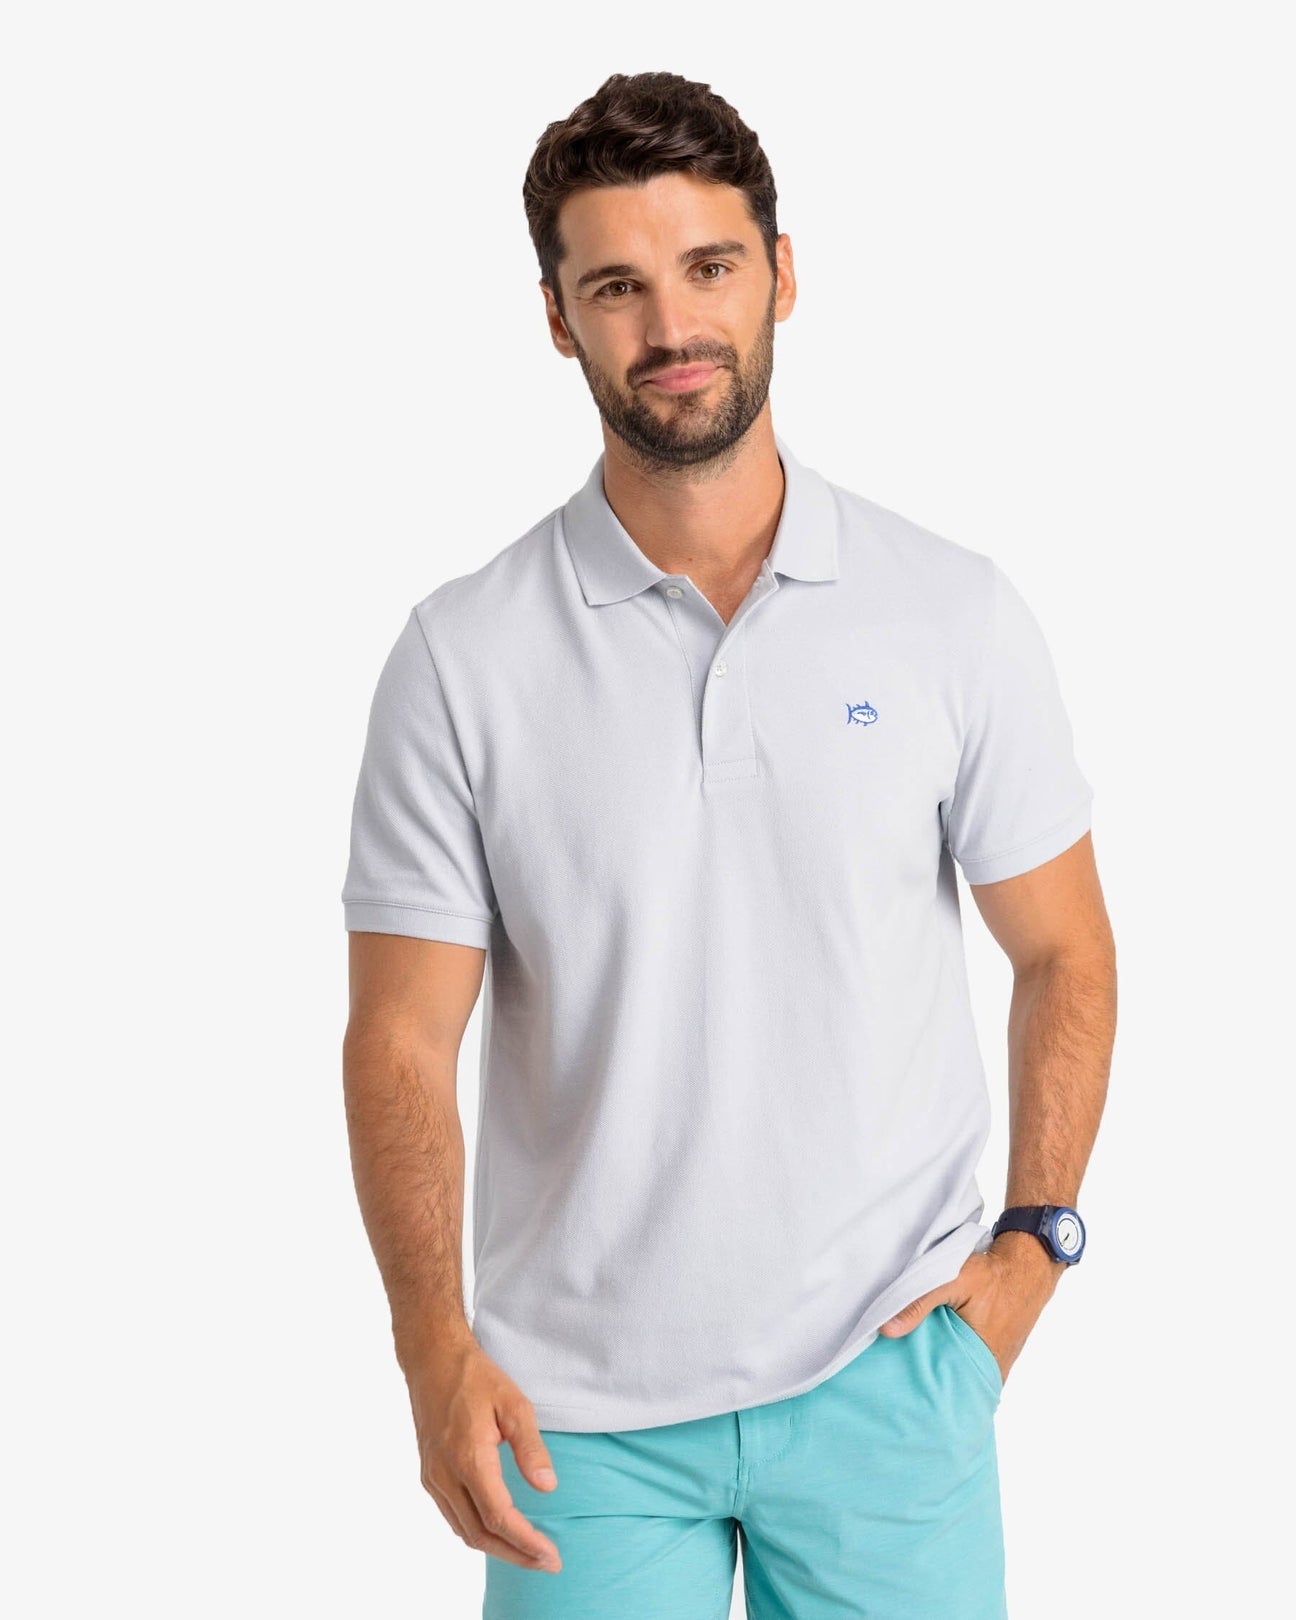 The model front view of the Men's New Skipjack Polo Shirt by Southern Tide - Slate Grey